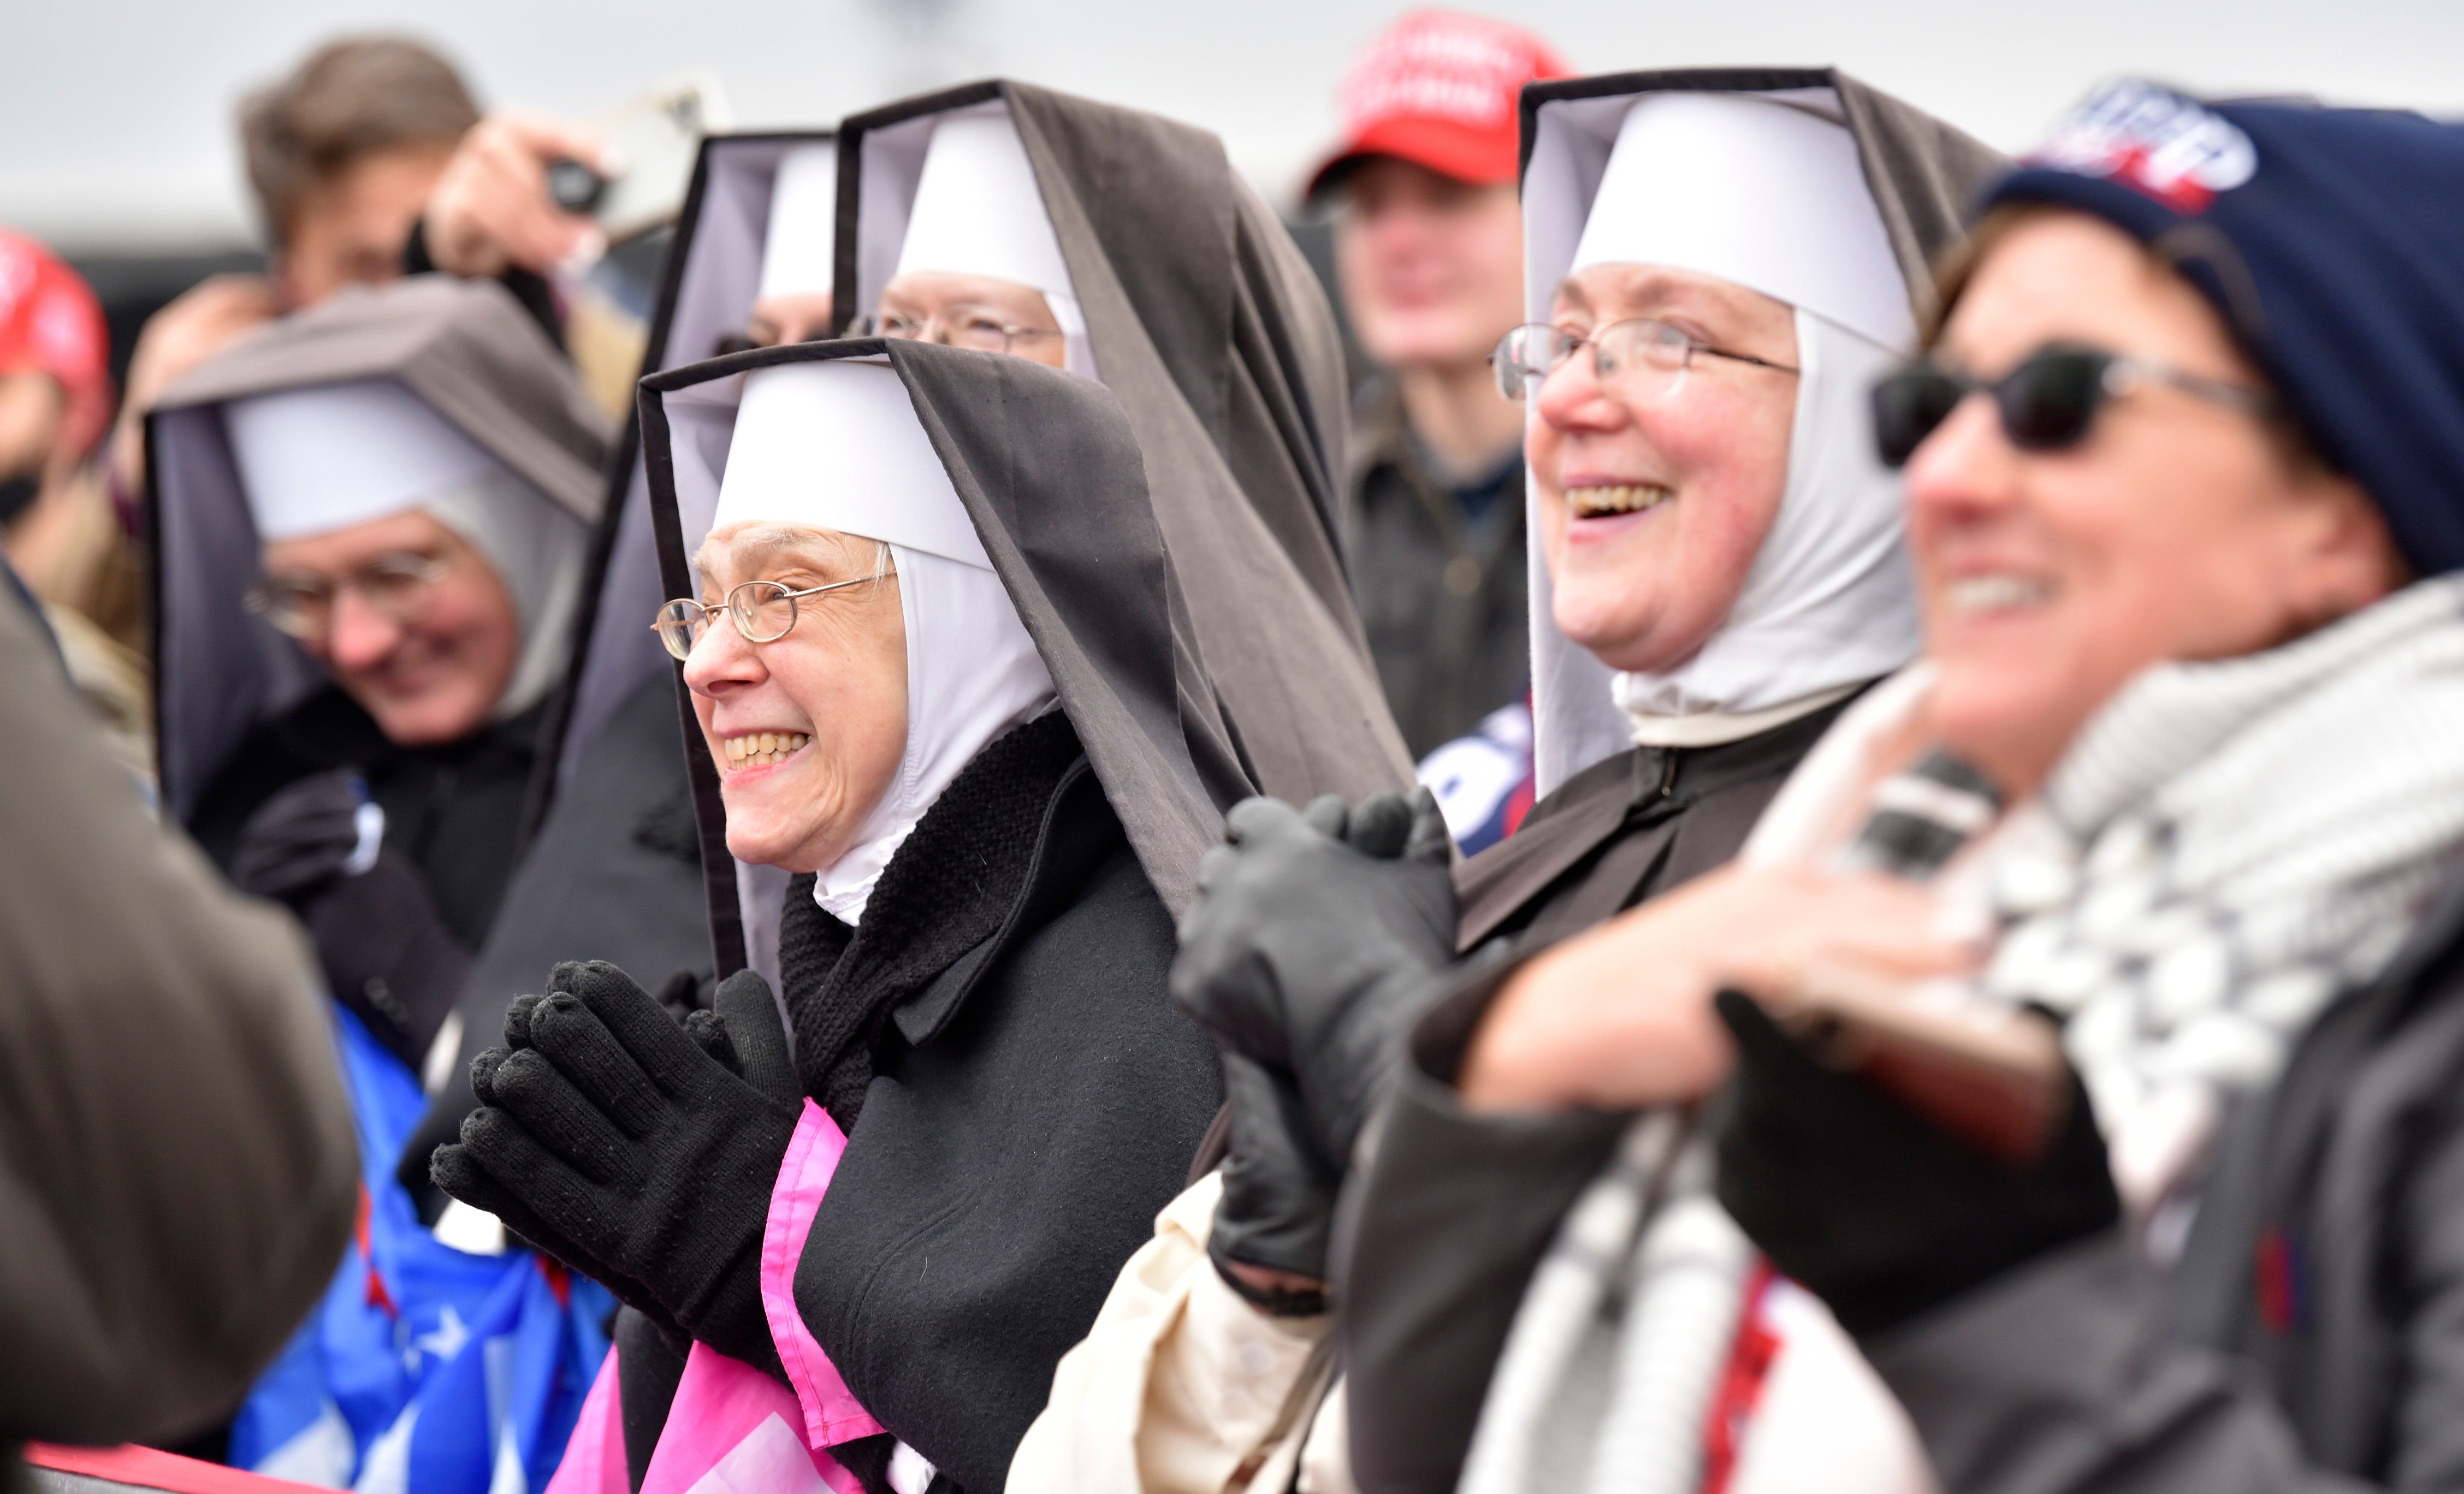 Dominican Sisters from Hartland, MI listen to the president at the Oakland International Airport in Waterford Twp., Friday, October 30, 2020, for his Make America Great Again Victory Rally.